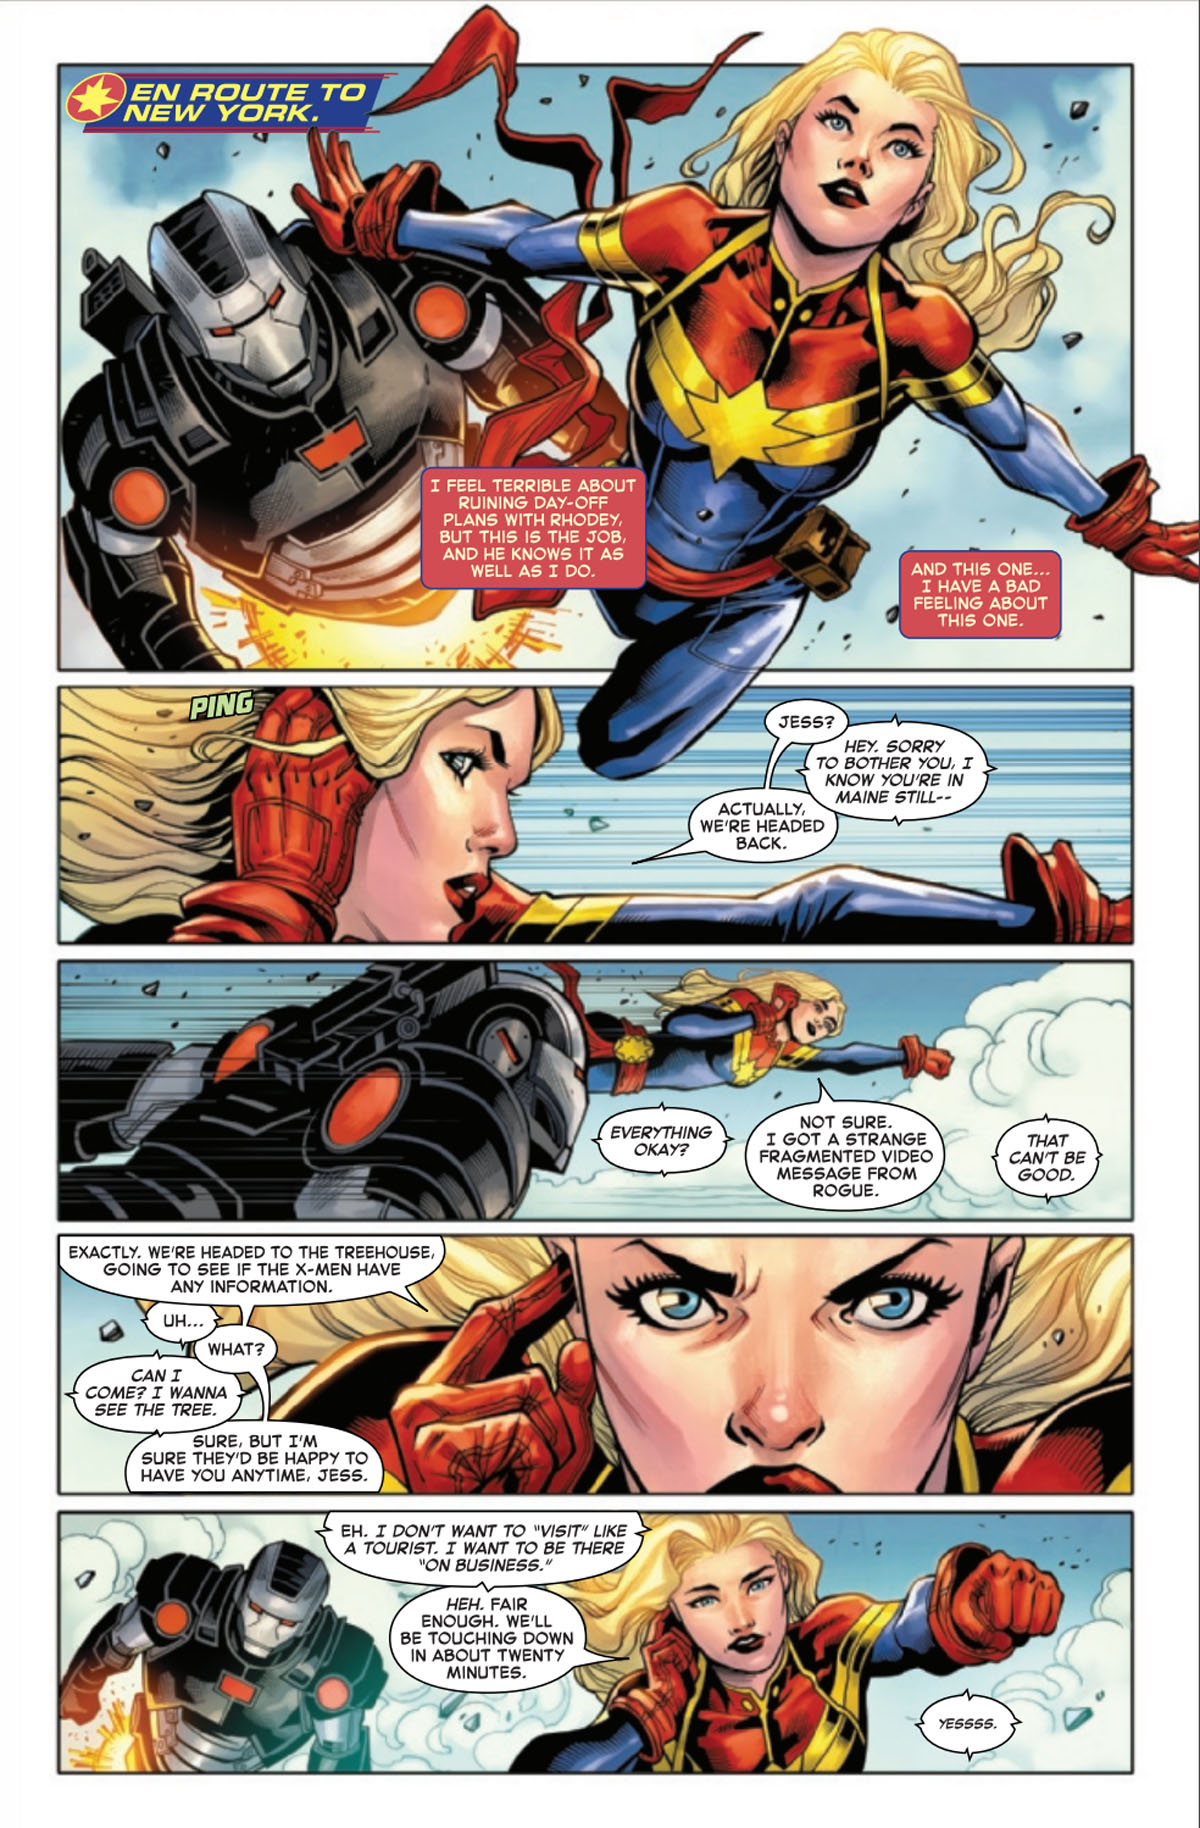 Captain Marvel #43 page 3